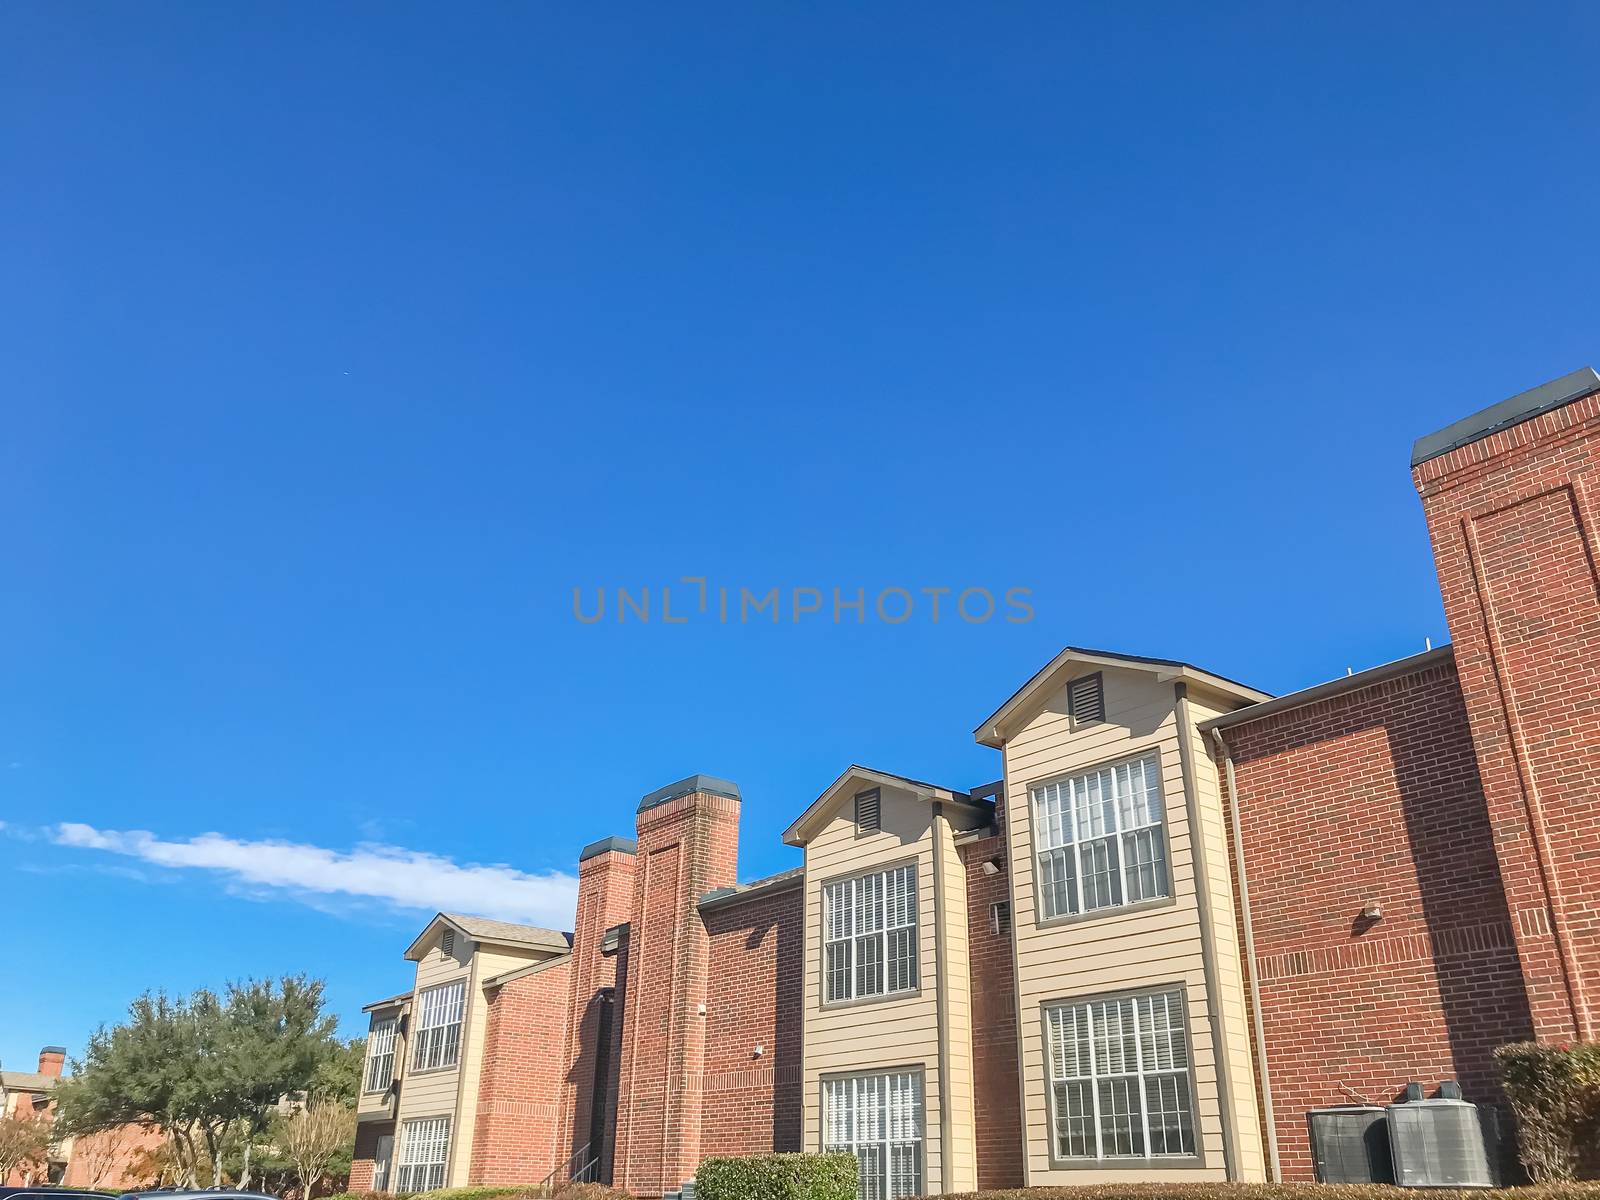 Typical apartment building with blue sky in suburban Dallas, Texas, USA